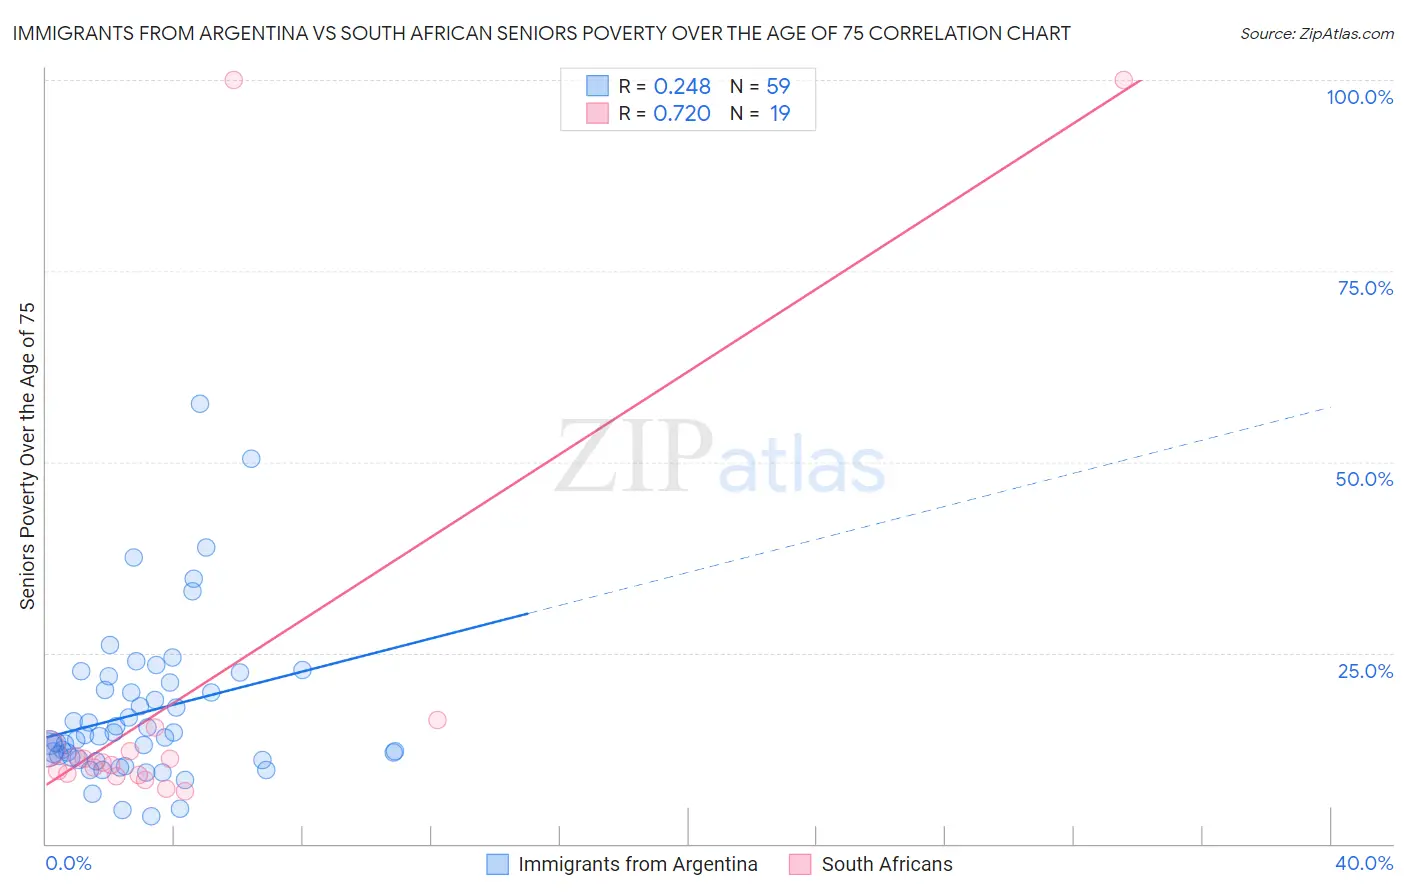 Immigrants from Argentina vs South African Seniors Poverty Over the Age of 75